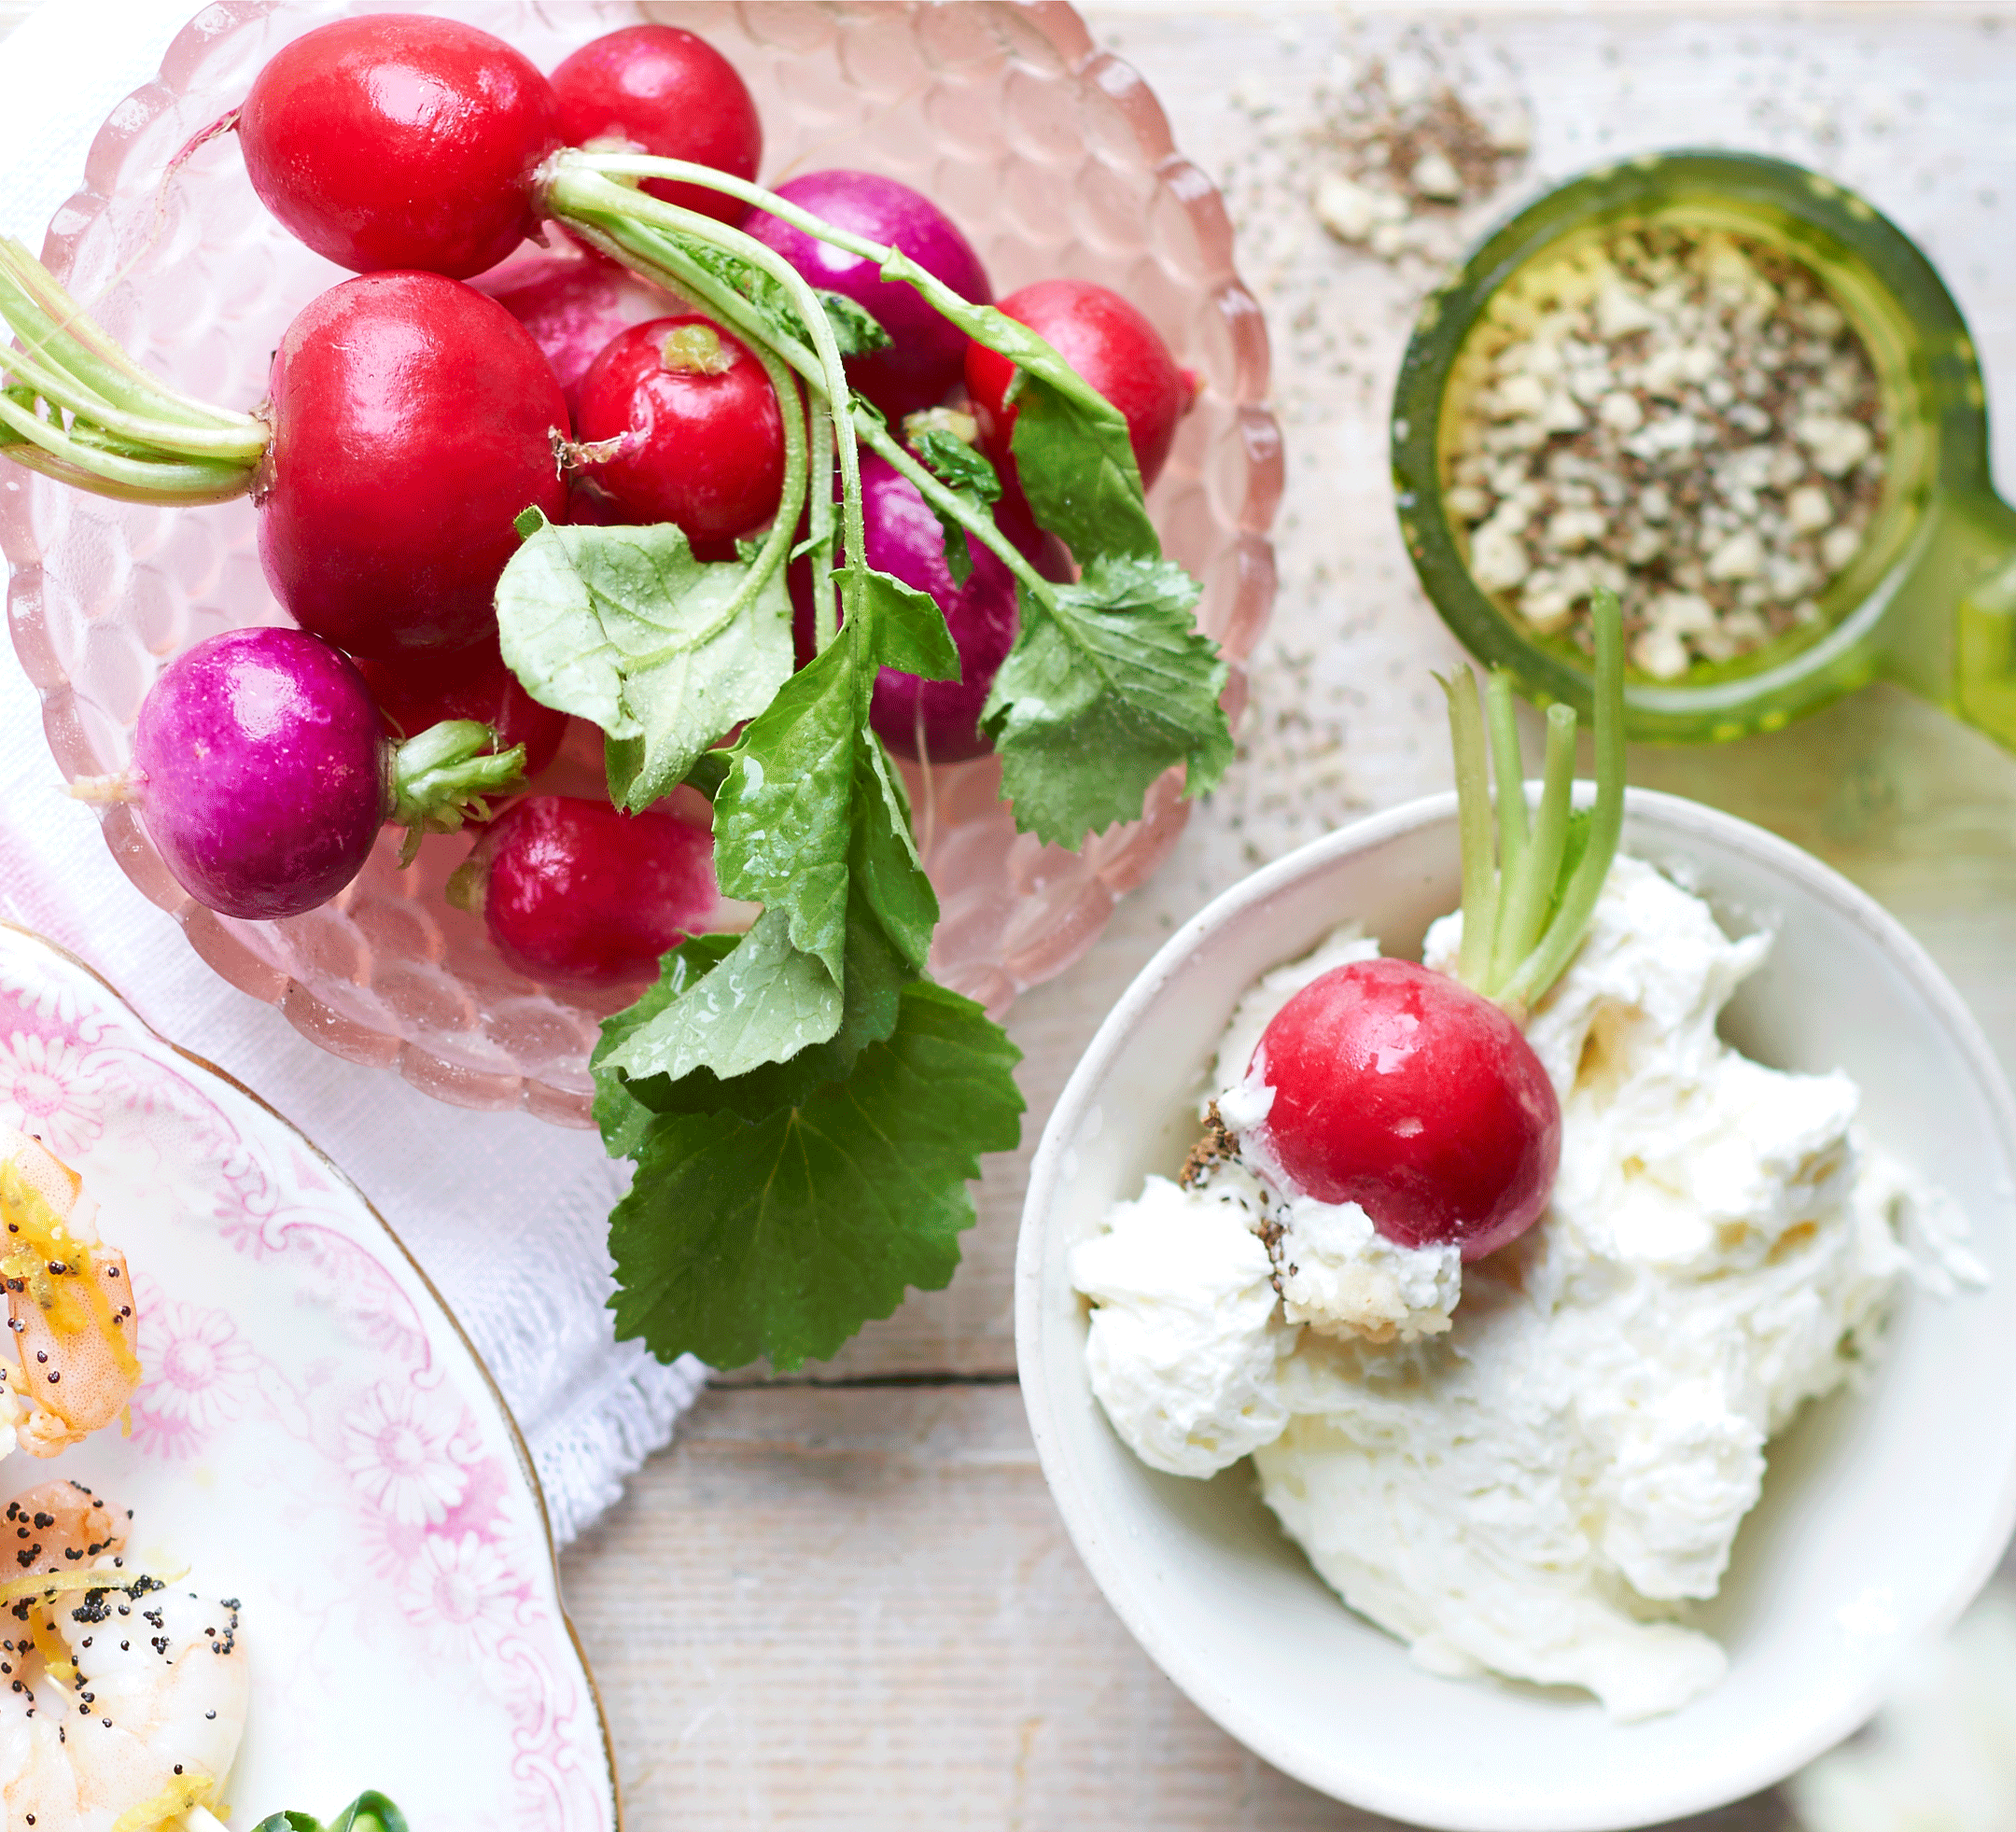 Radishes with whipped goat’s butter & celery salt